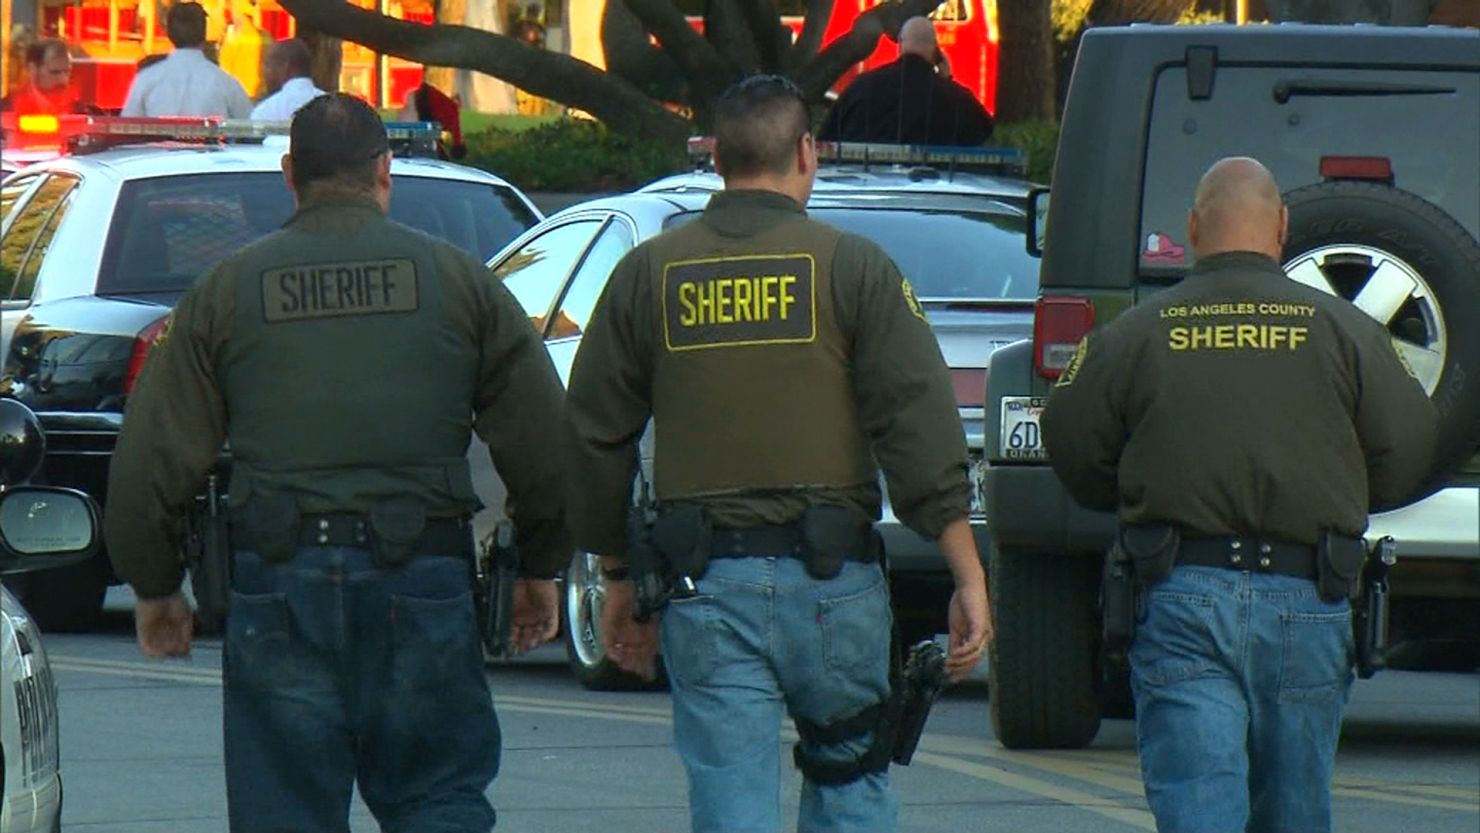 Officers arrive at the scene of the shooting in Irwindale, California.